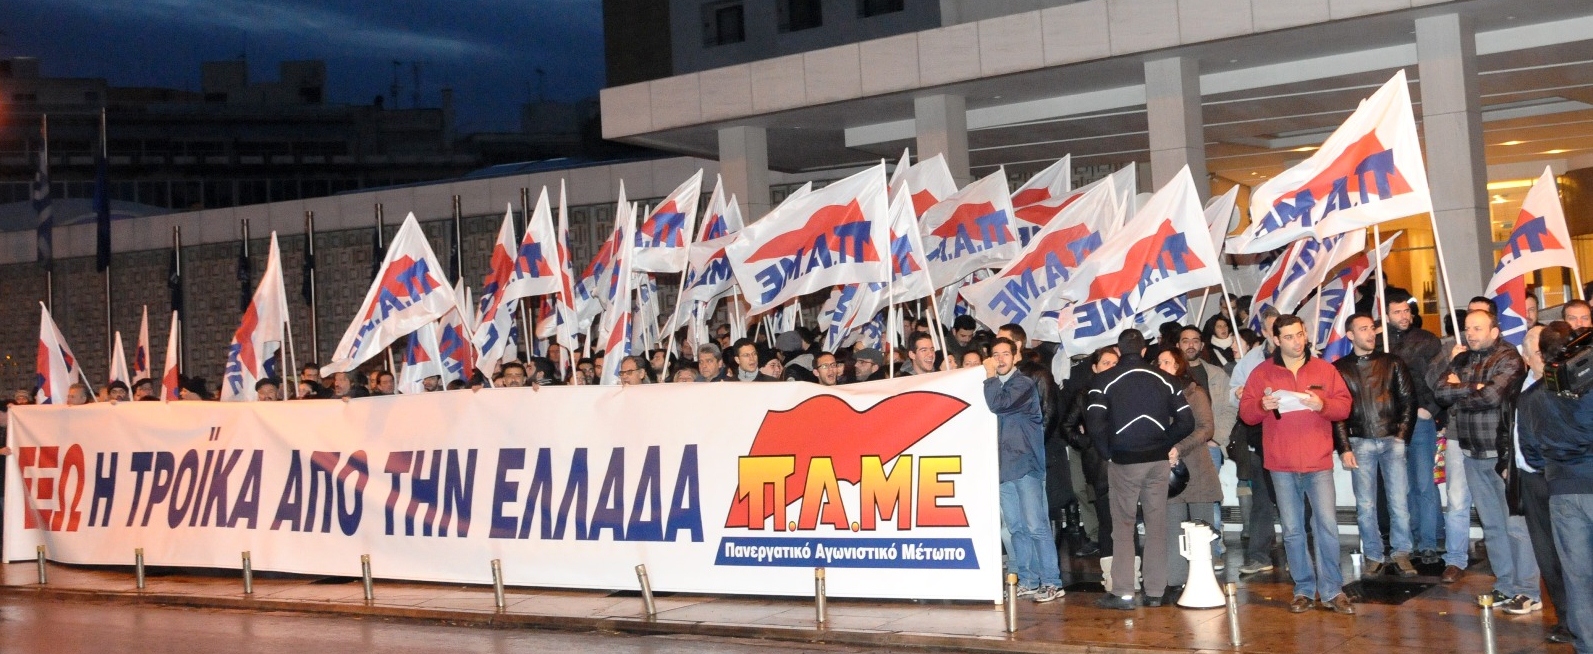 Down with the Government, Troika Out! All Workers Militant Front (PAME) demonstration outside IMF delegation's hotel in Athens